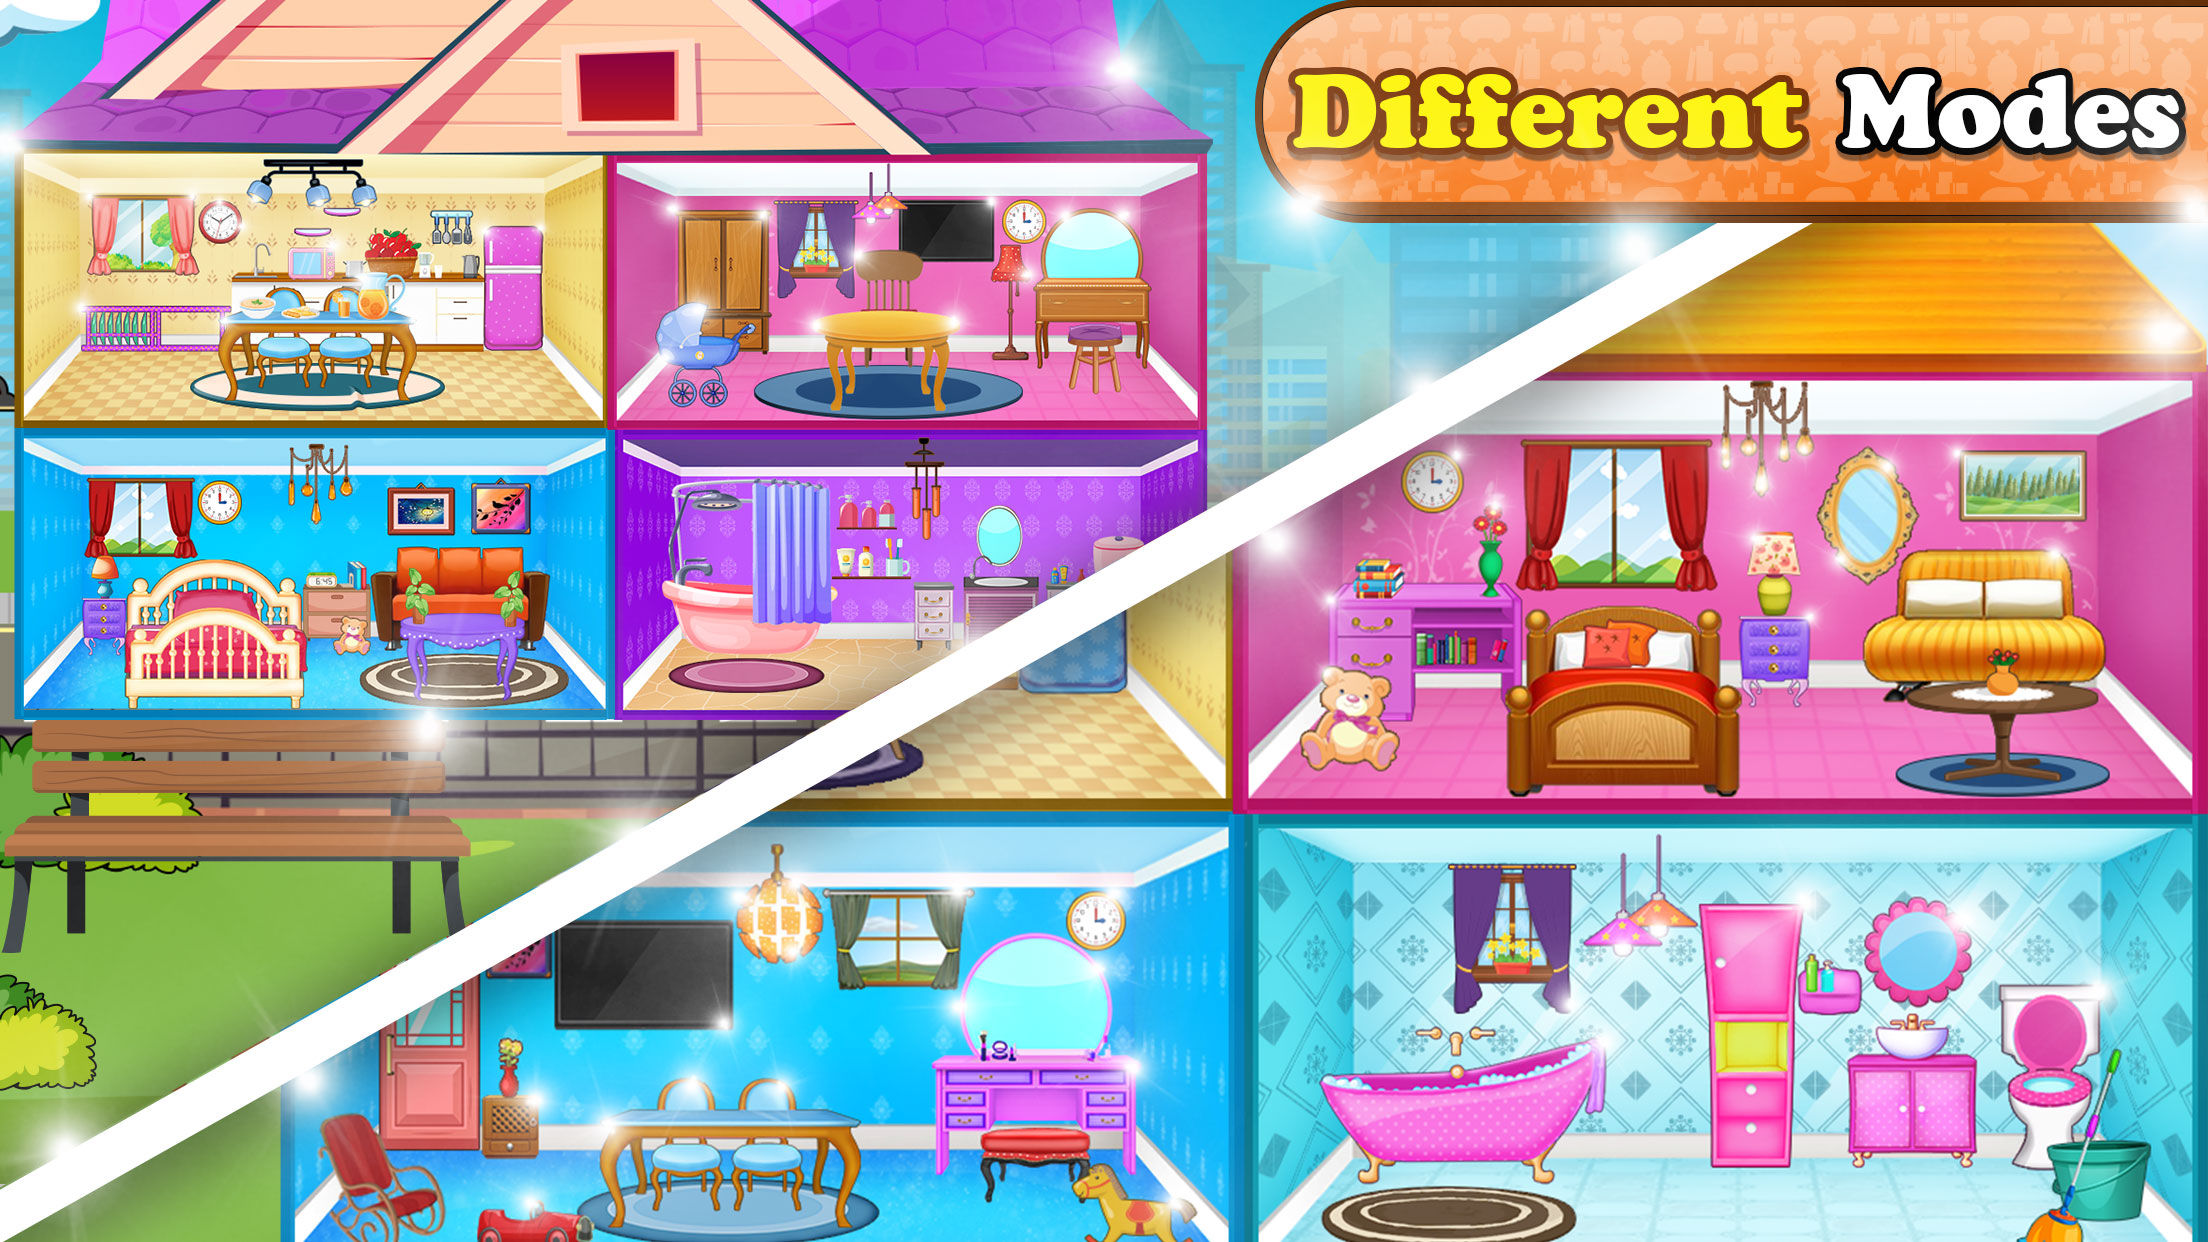 Doll House Decorating - Girl Games